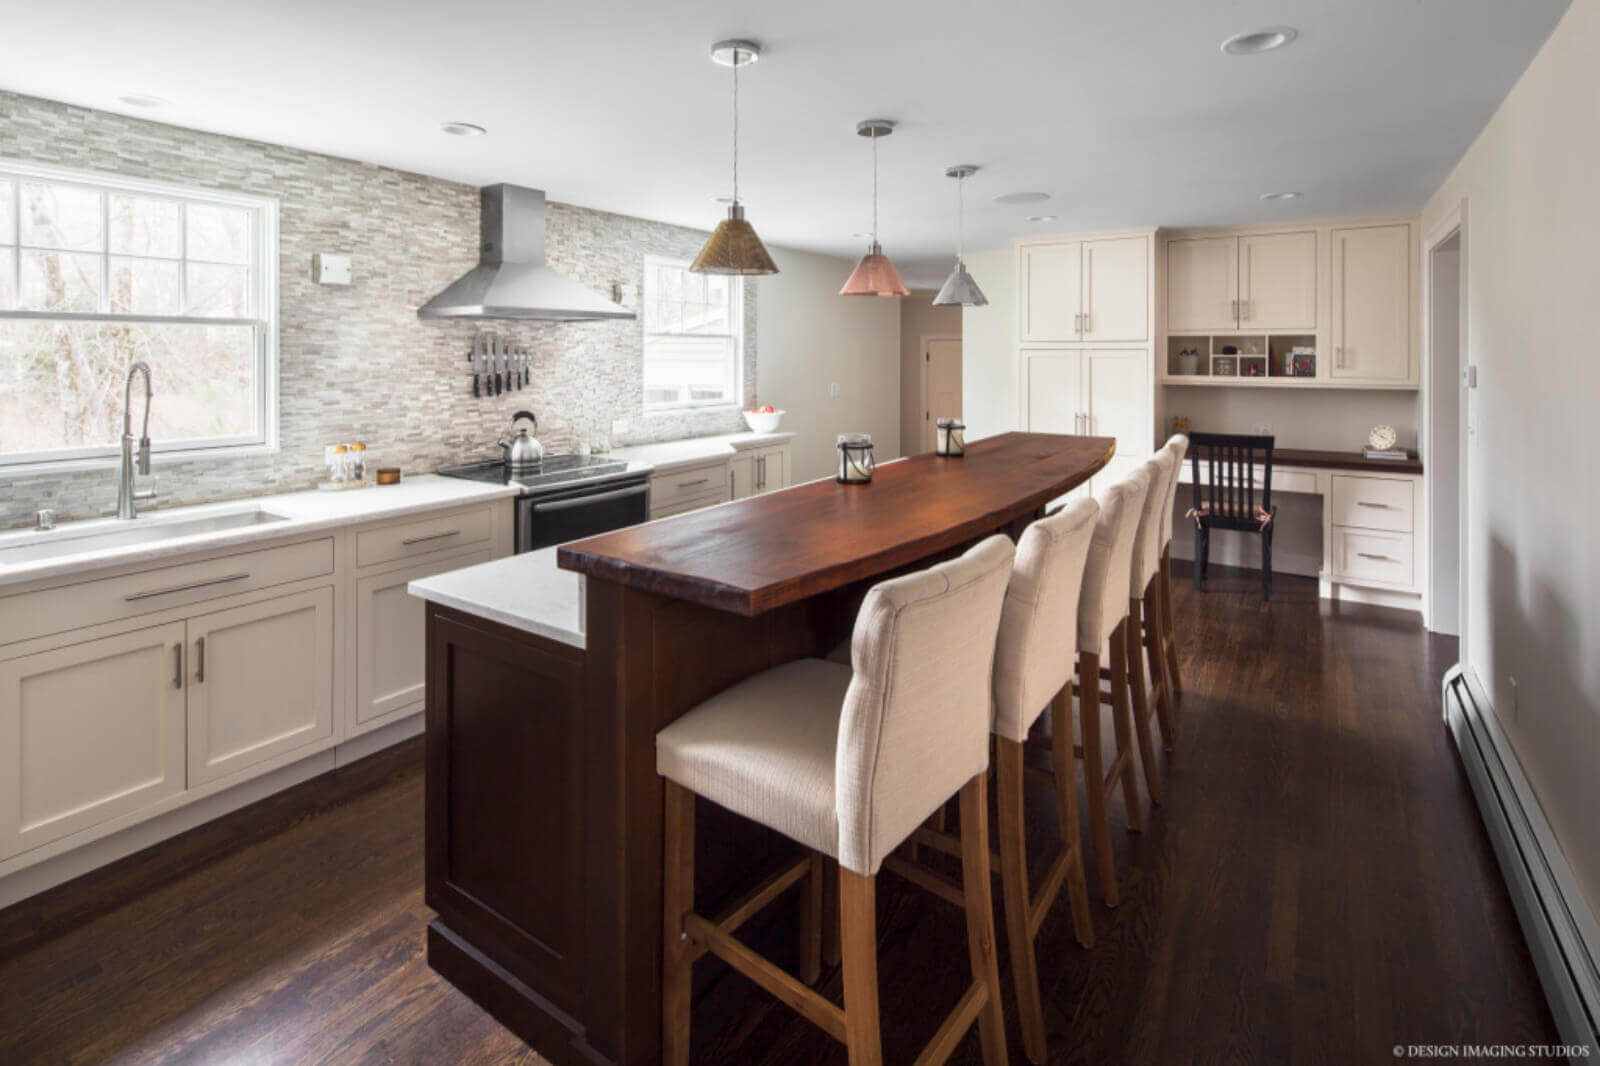 Why You Should Work With an Interior Designer and Home Remodeler